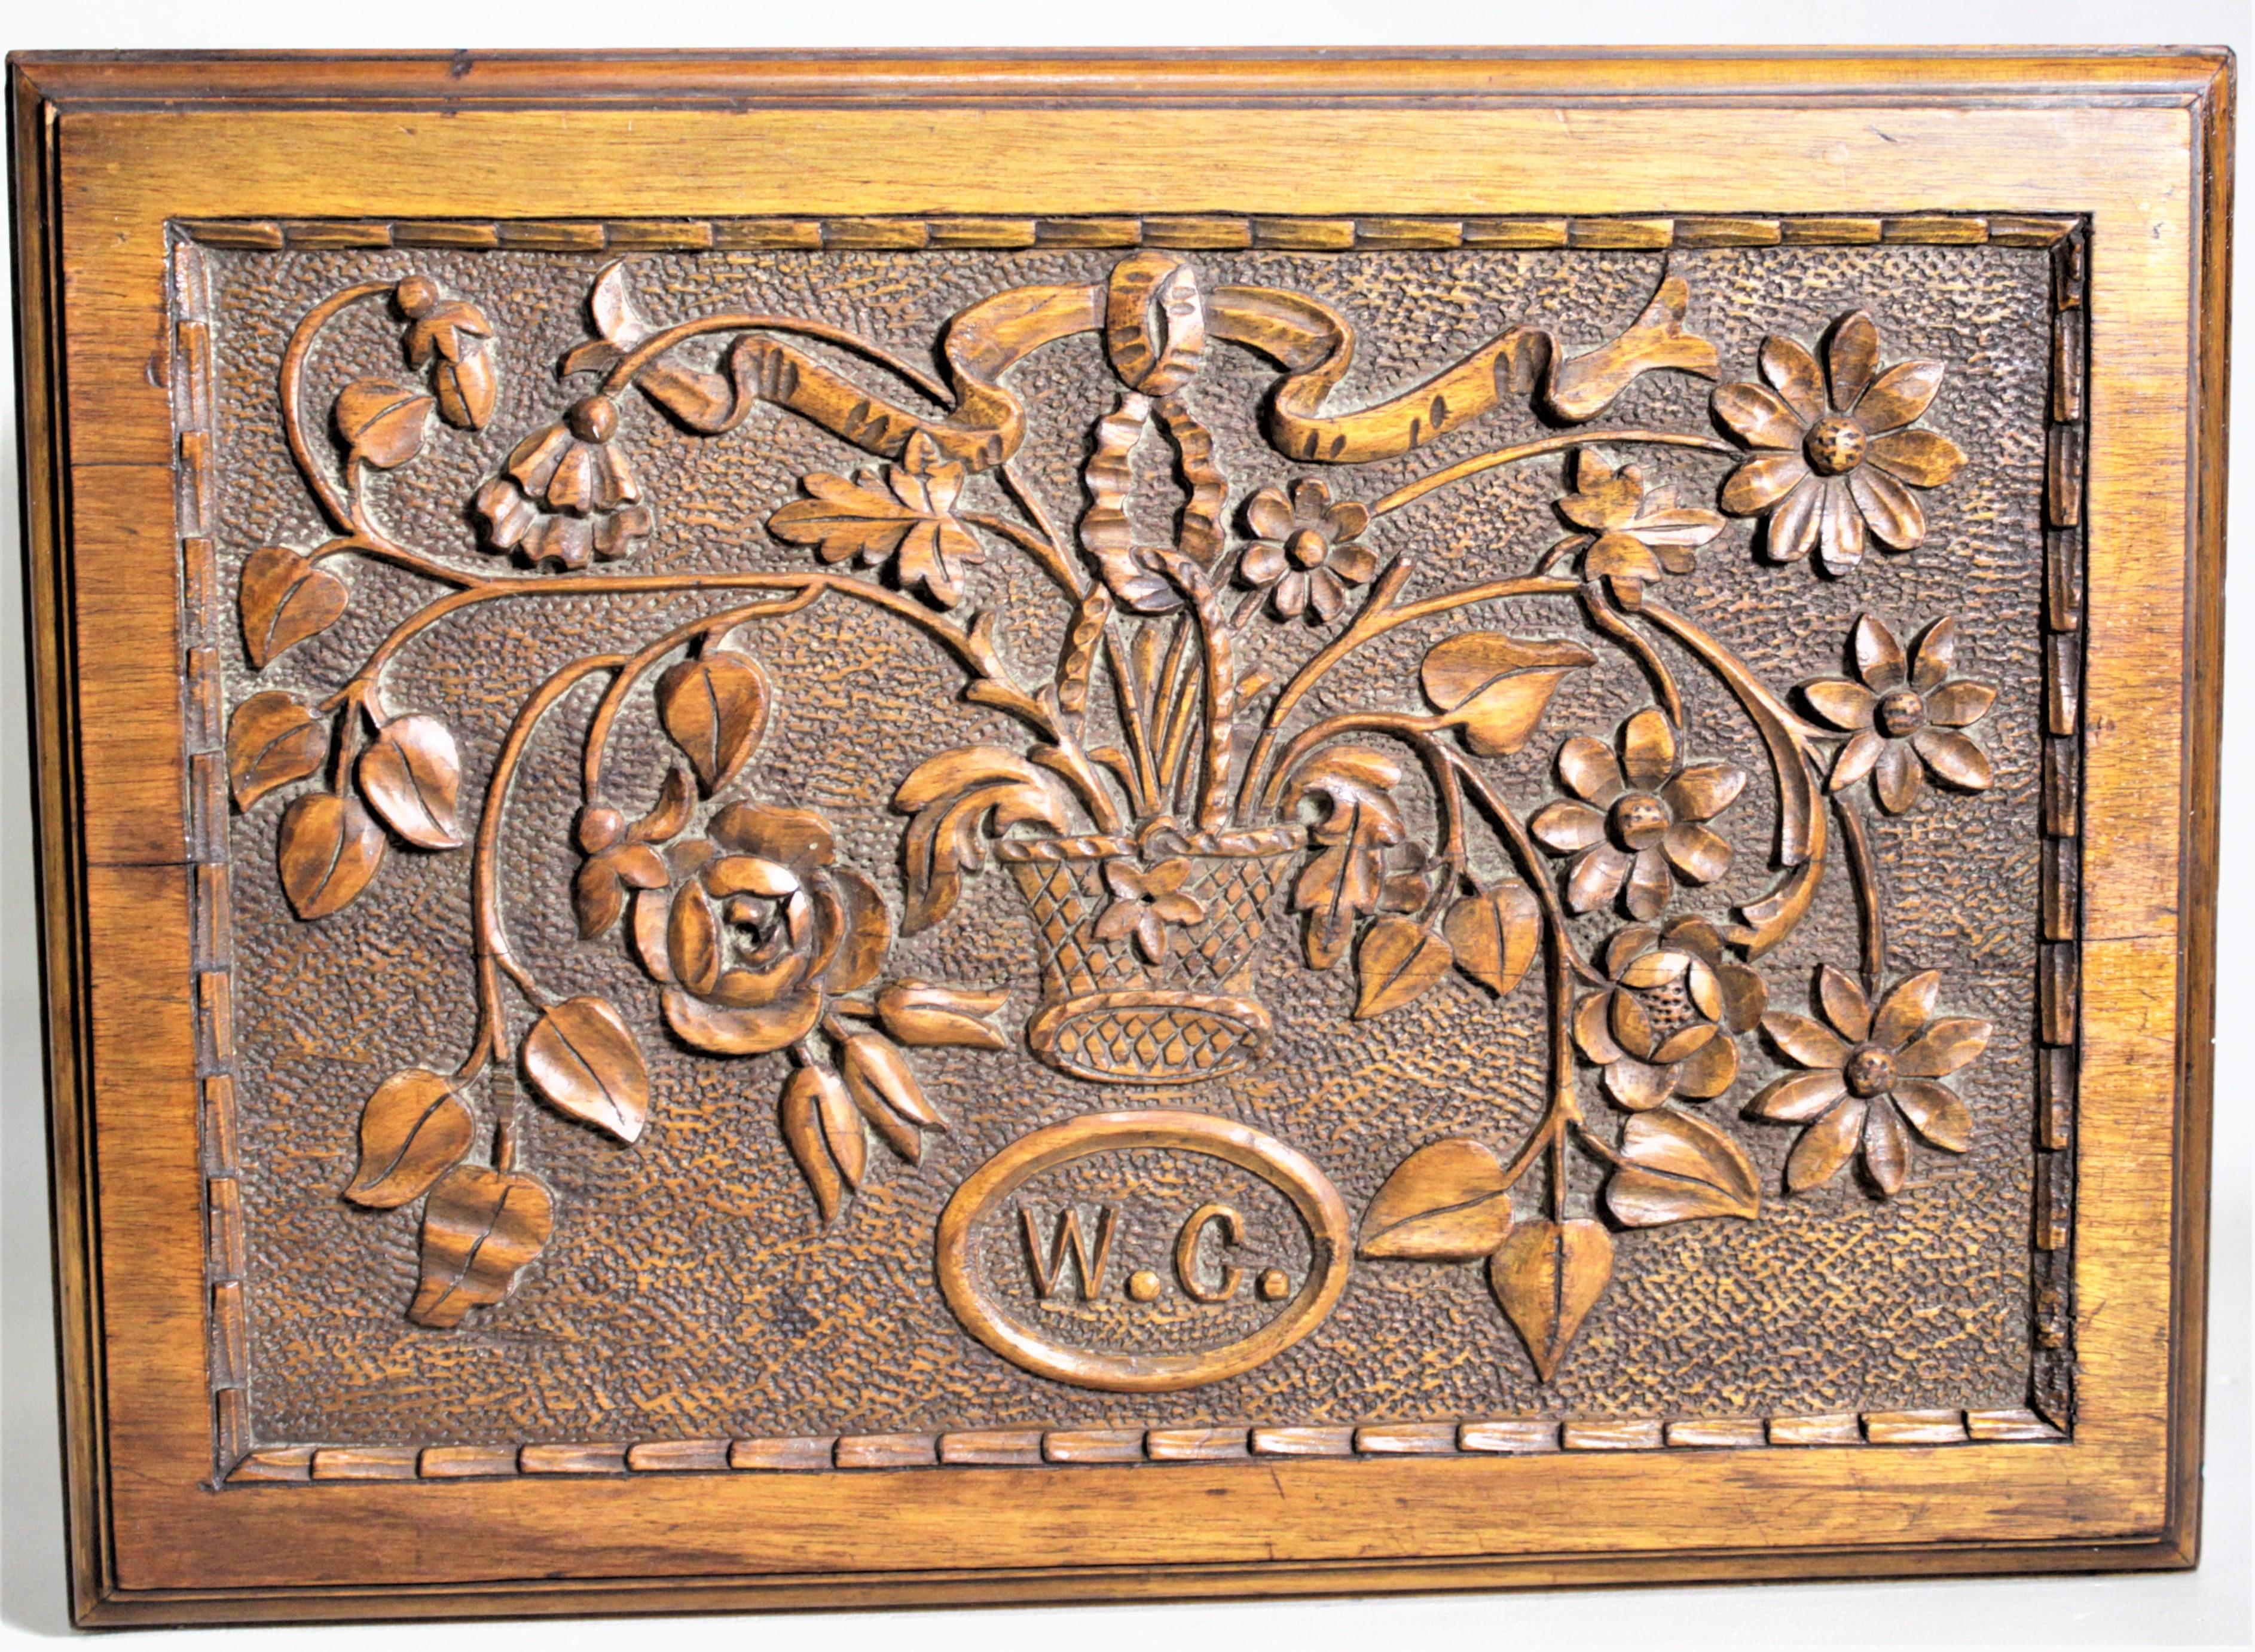 Hand-Carved Antique Hand Carved Wooden Jewelry Casket or Box with Ornate Floral Decoration